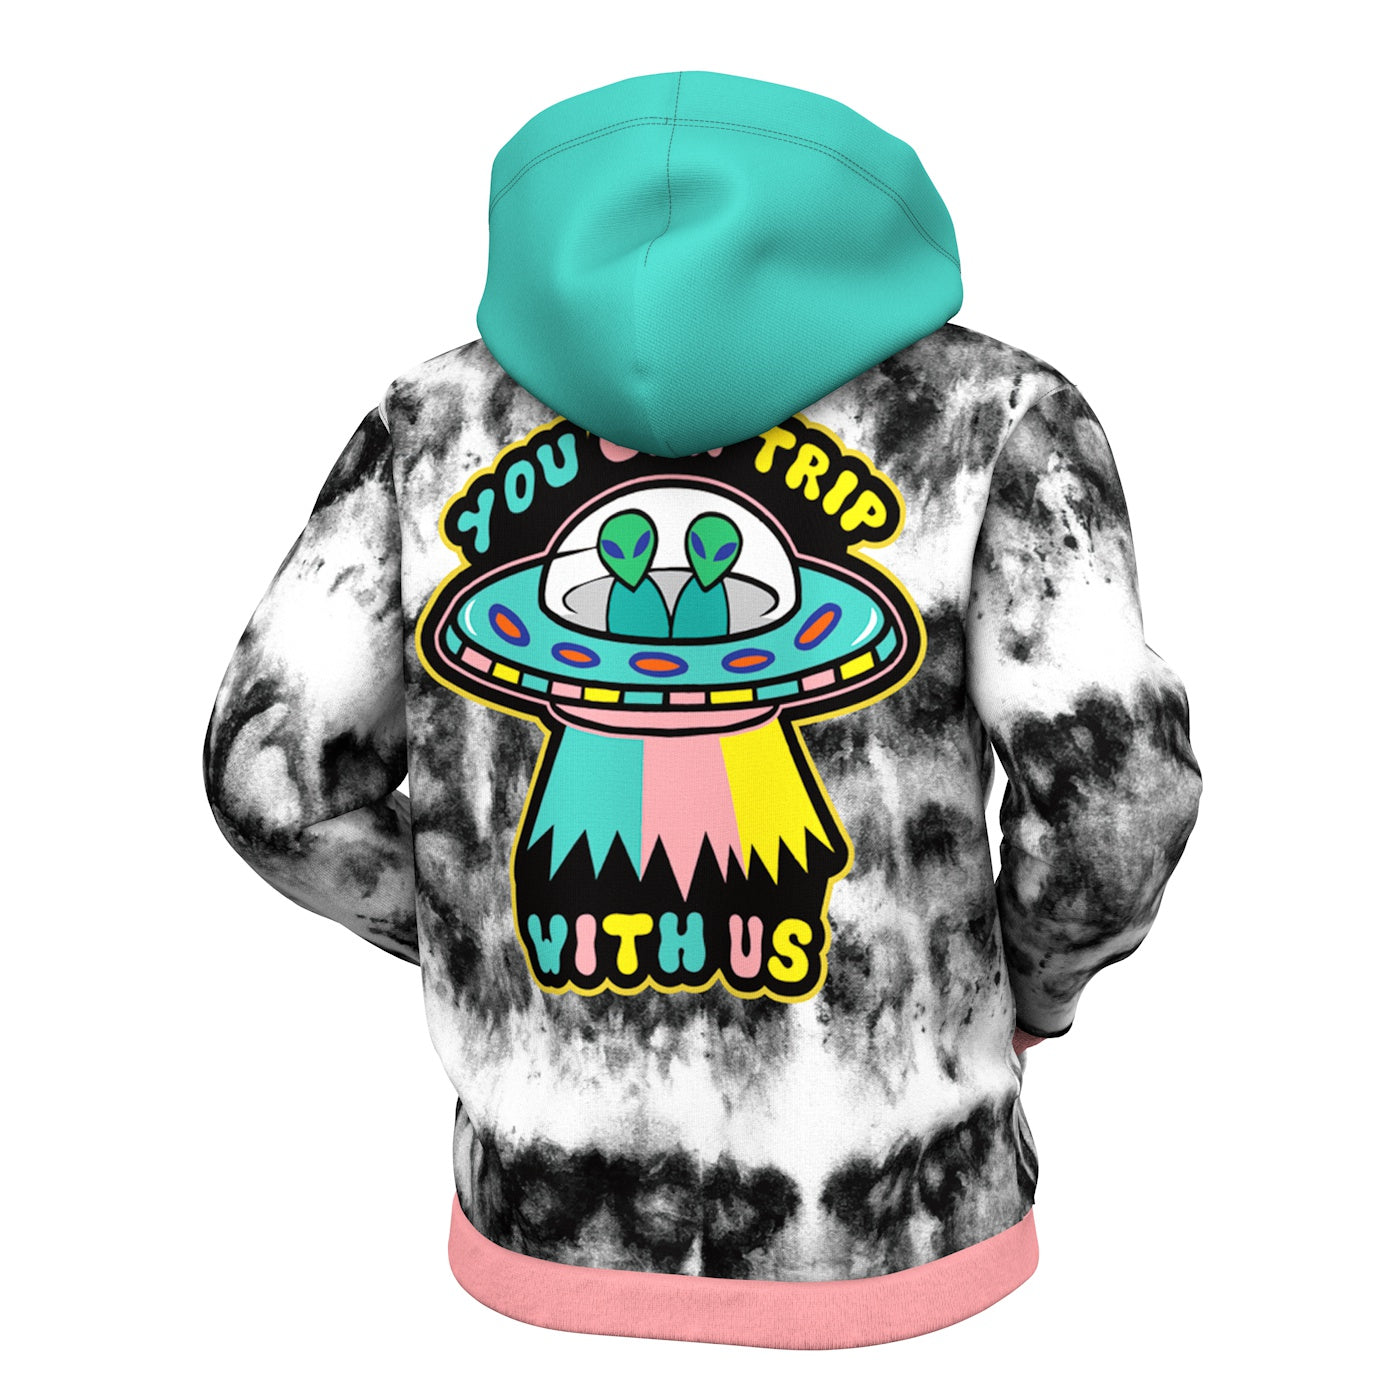 You Can Trip With Us Zip Up Hoodie